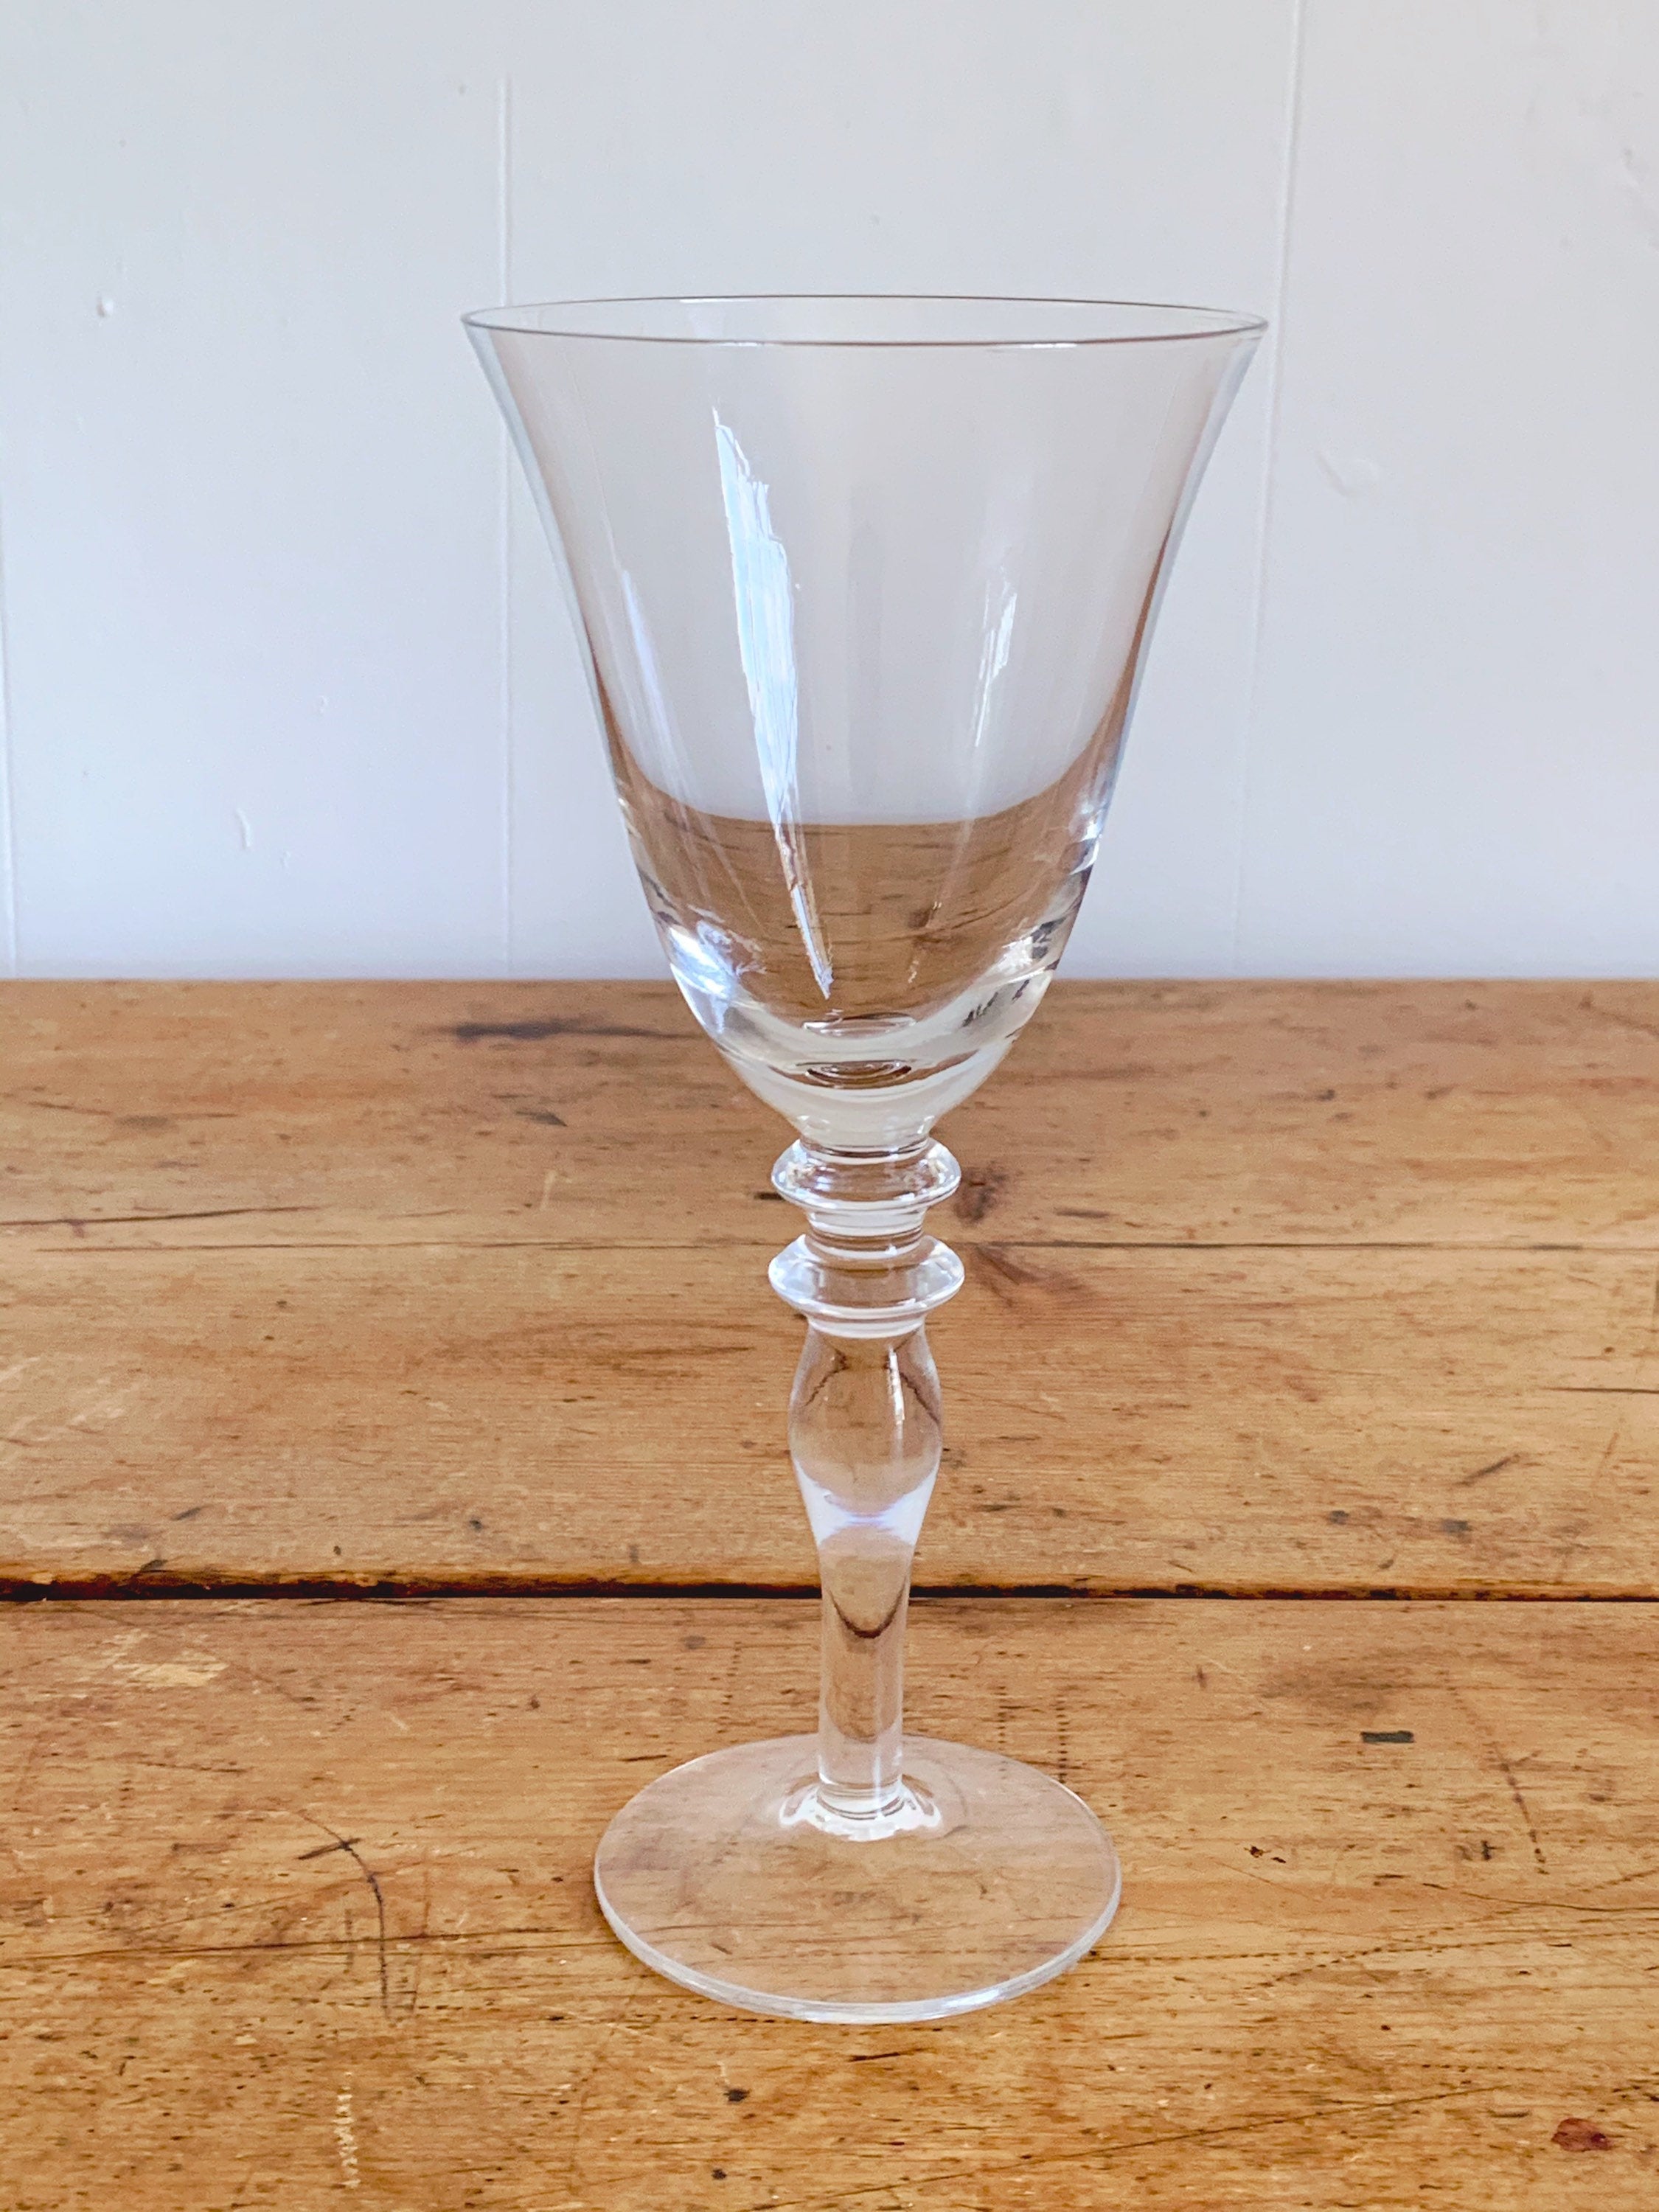 Pair of Vintage Mouth Blown Clear Crystal Wine Glass or Water Goblet